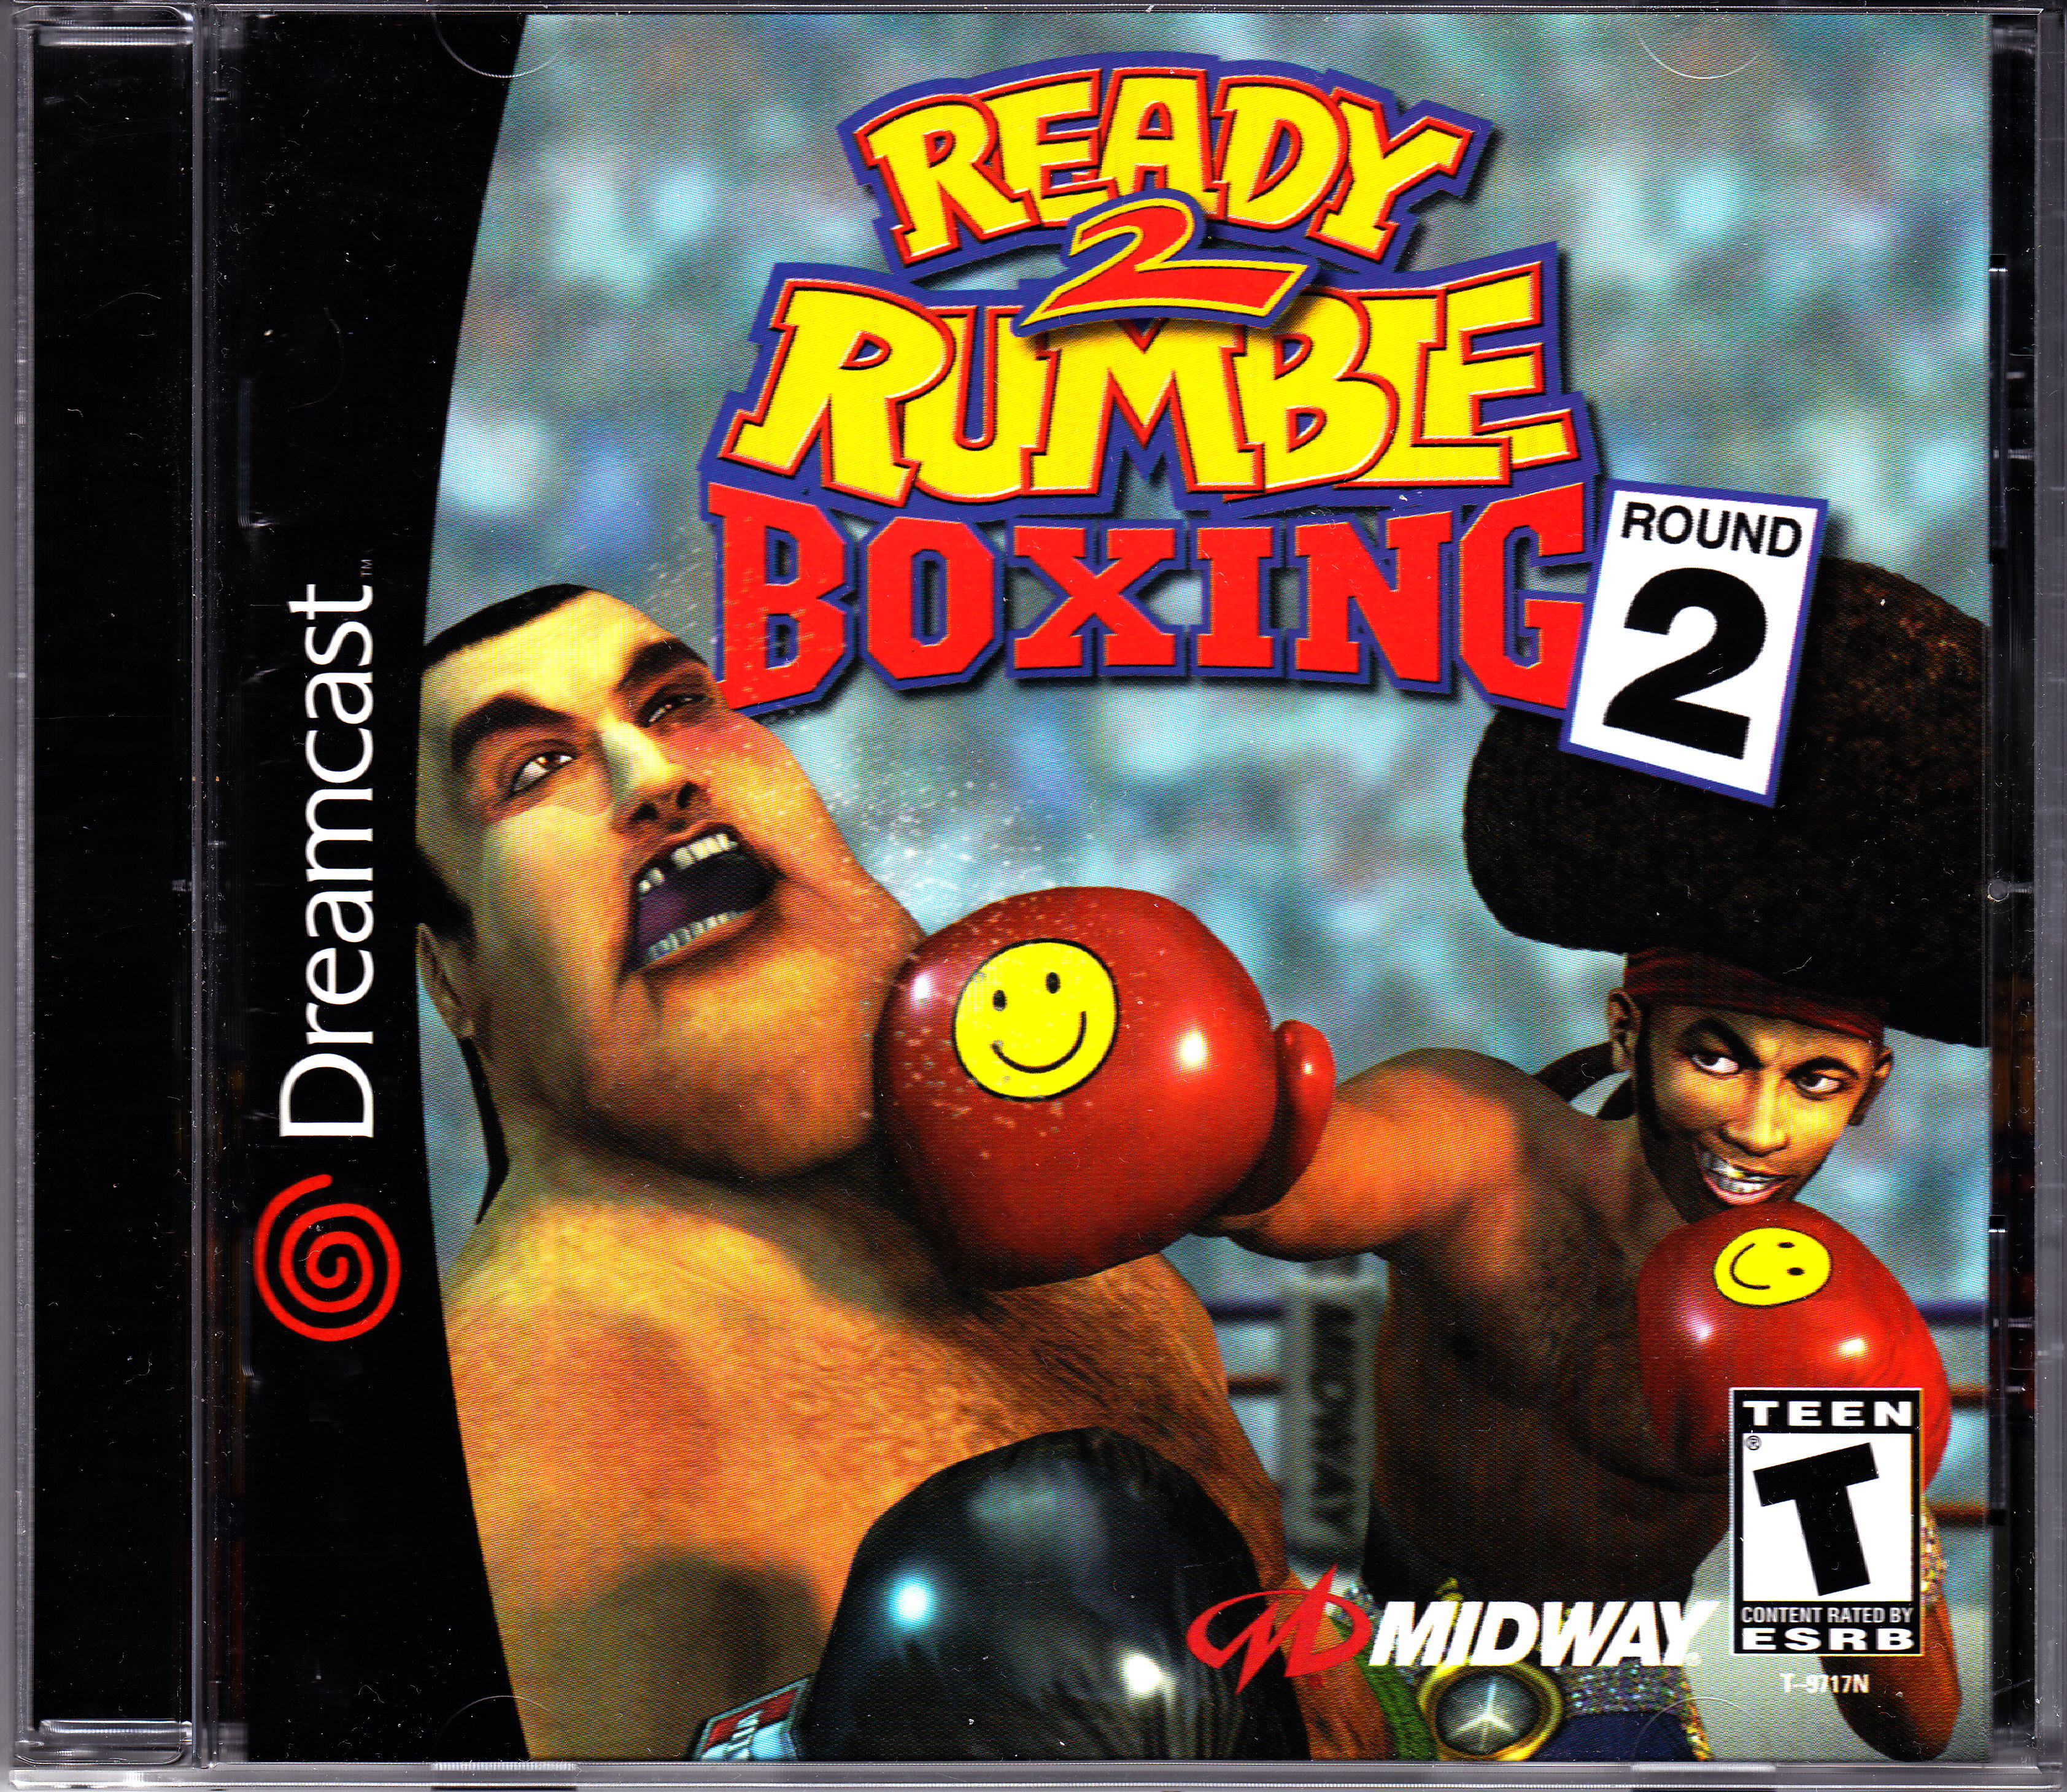 Ready 2 use. Ready 2 Rumble Boxing для Sega Dreamcast. Бокс диска ps2. Ready 2 Rumble Boxing Round 2 Michael Jackson. Ready 2 Rumble Boxing на ps5.